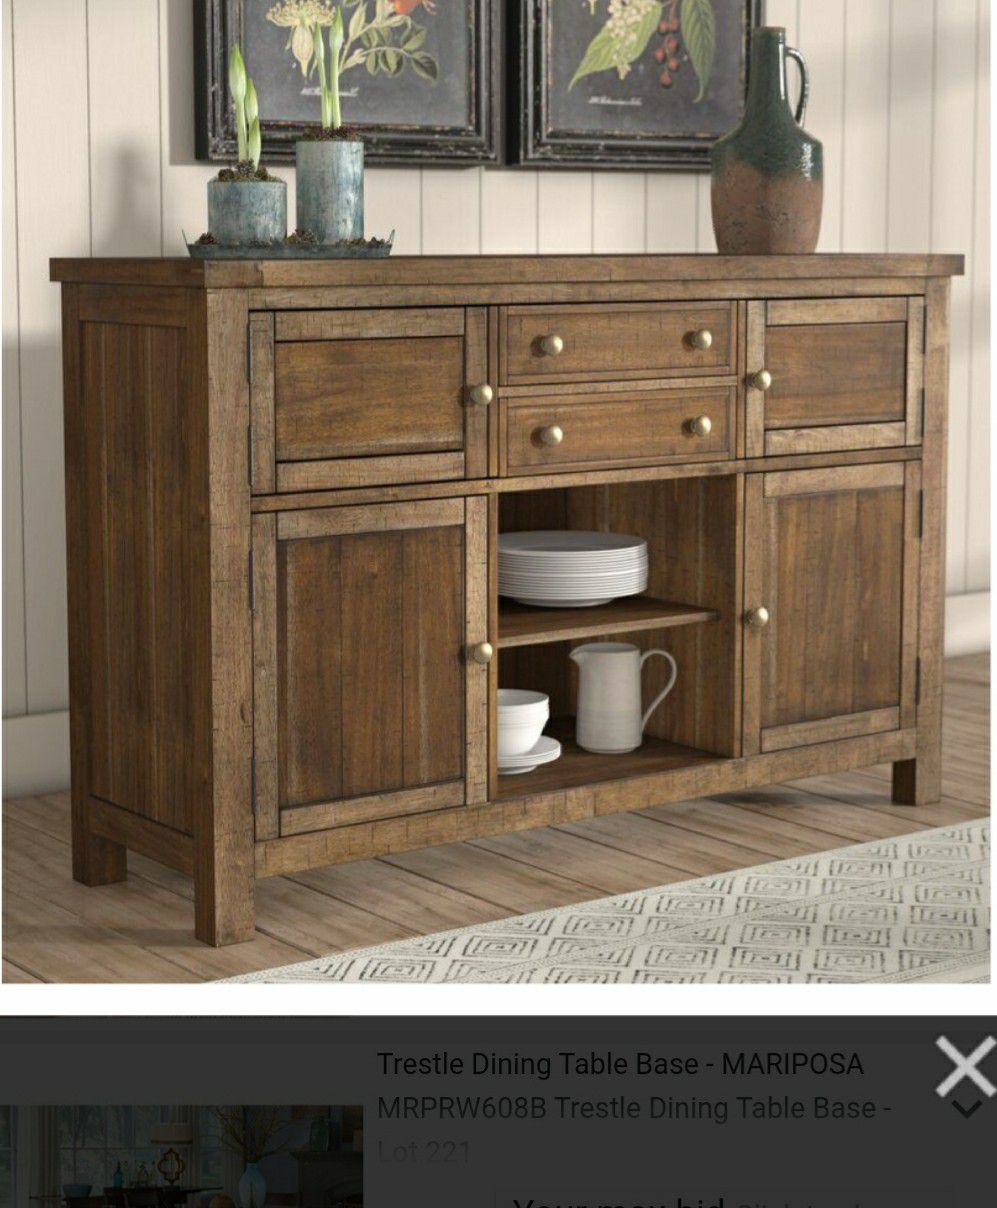 Hillary Dining Room Buffet Table Serial191512472086